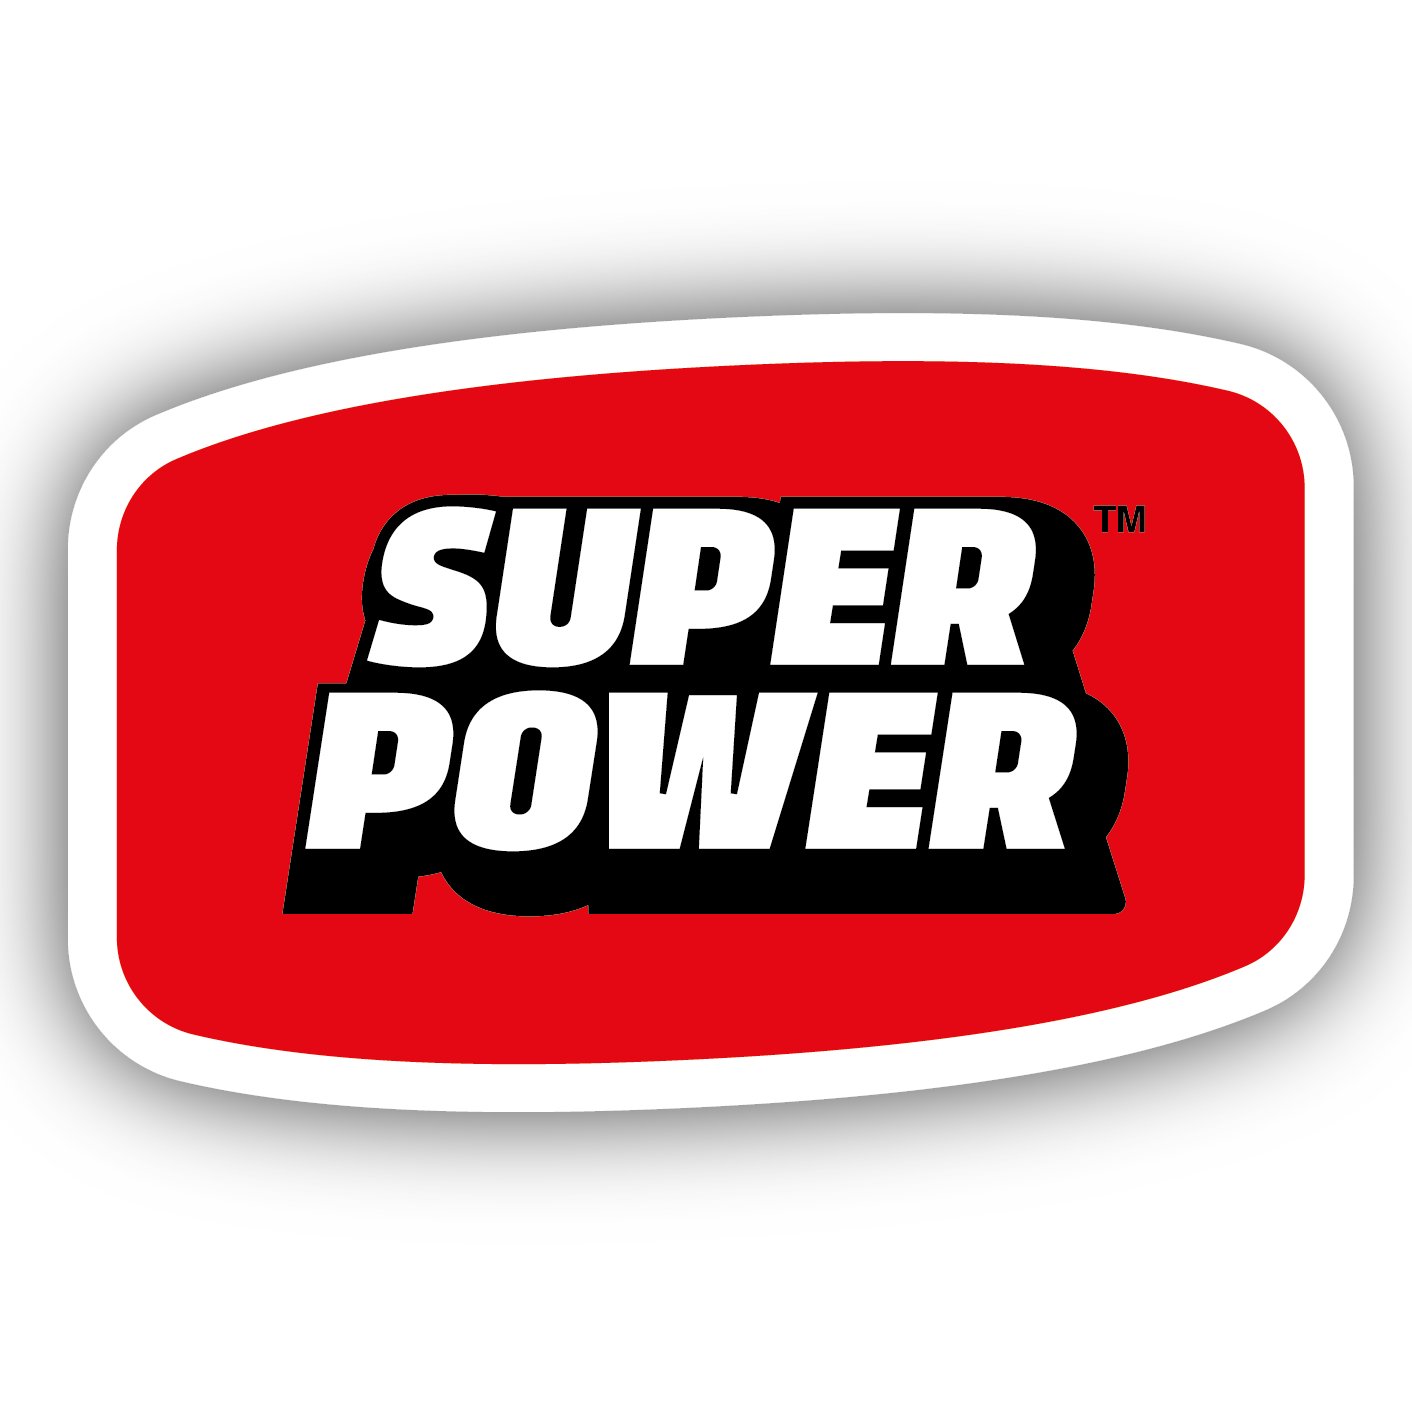 Super Power is a range of plumbing and engineering liquids and adhesives. Supplying plumbing and heating suppliers across the UK.